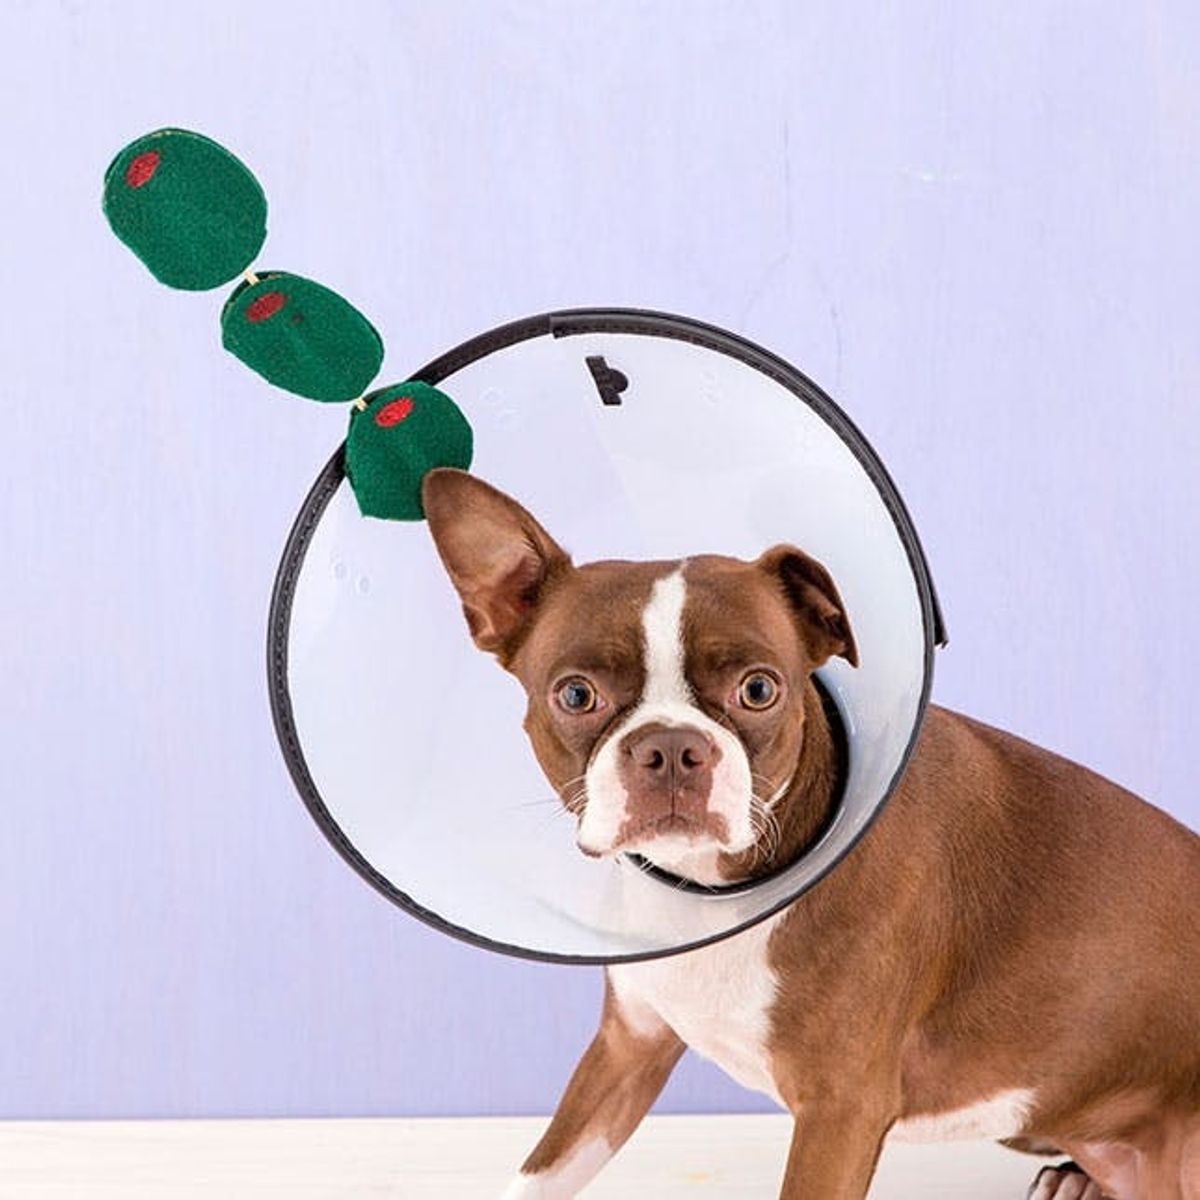 This Dog Martini Is the Funniest Pet Costume Ever